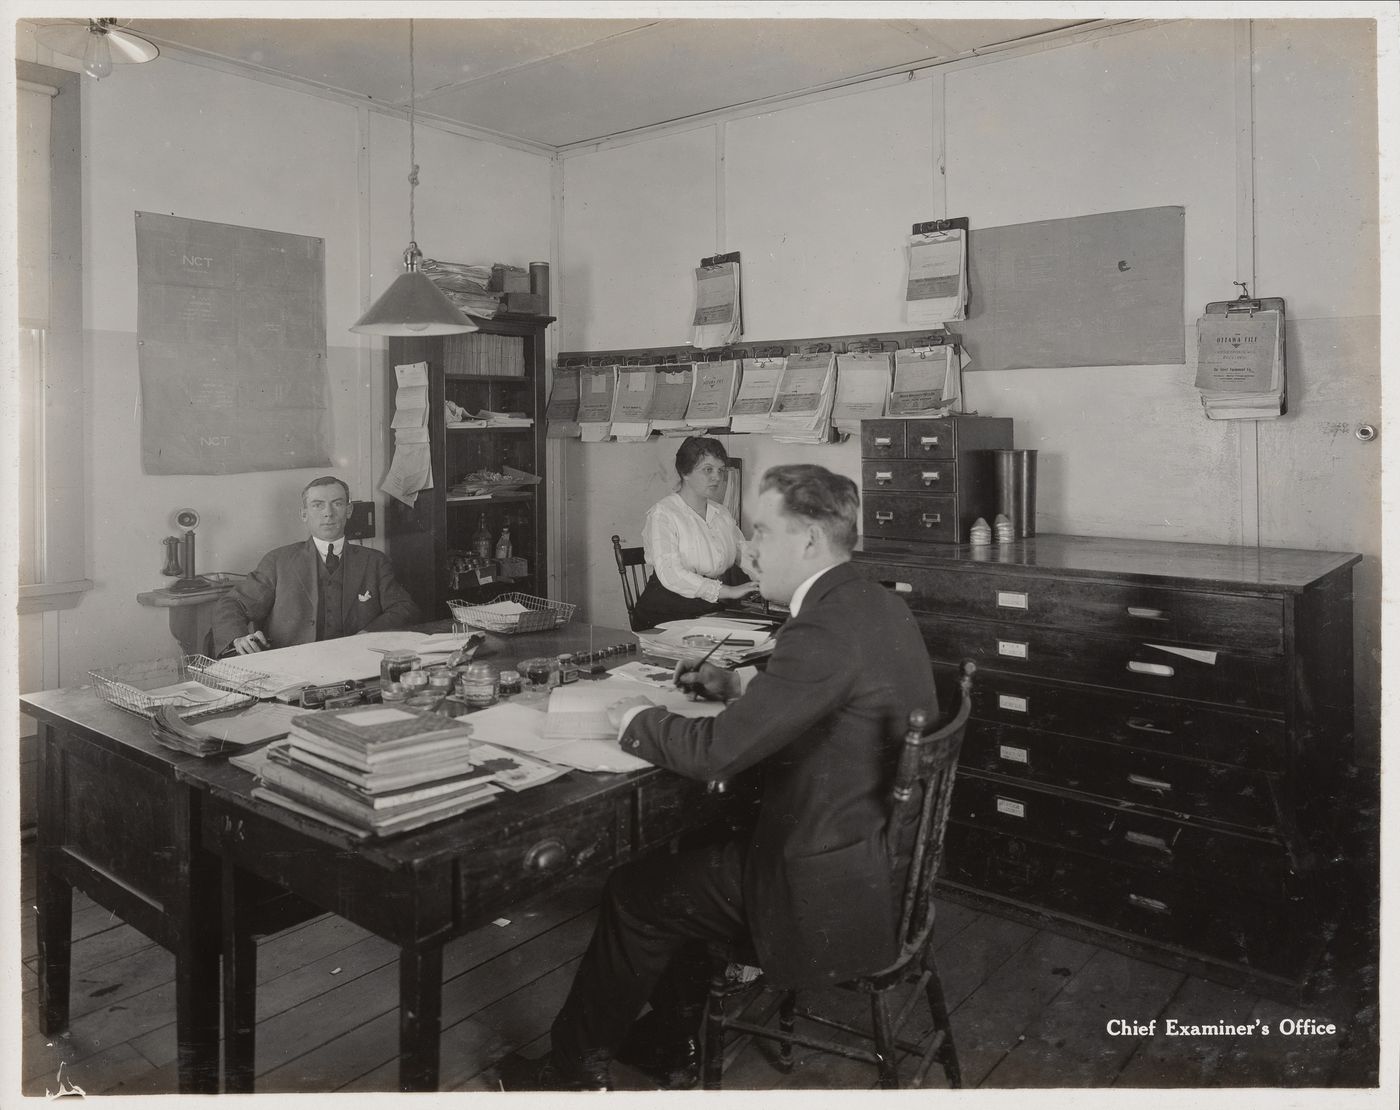 Interior view of chief examiner's office at the Energite Explosives Plant No. 3, the Shell Loading Plant, Renfrew, Ontario, Canada